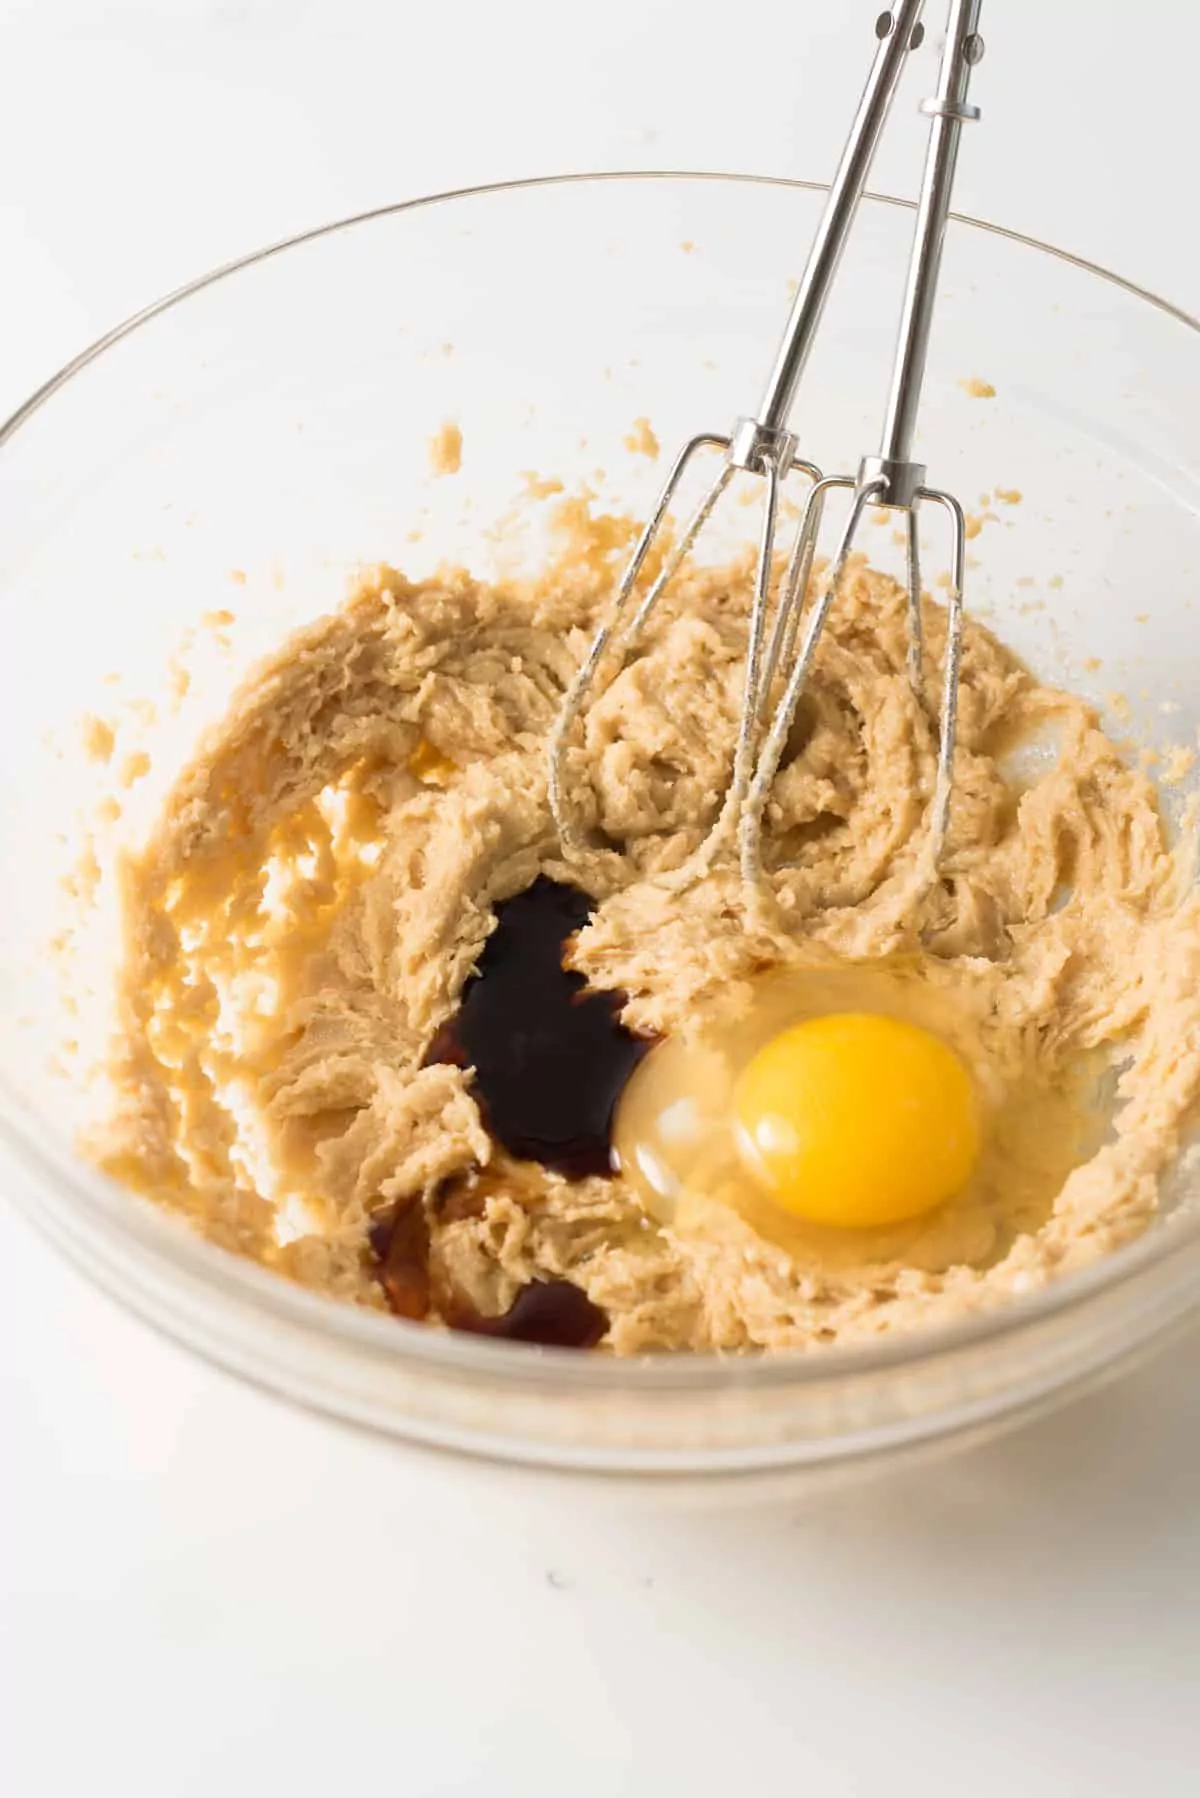 Butter, Swerve brown sugar, eggs and vanilla in glass mixing bowl.